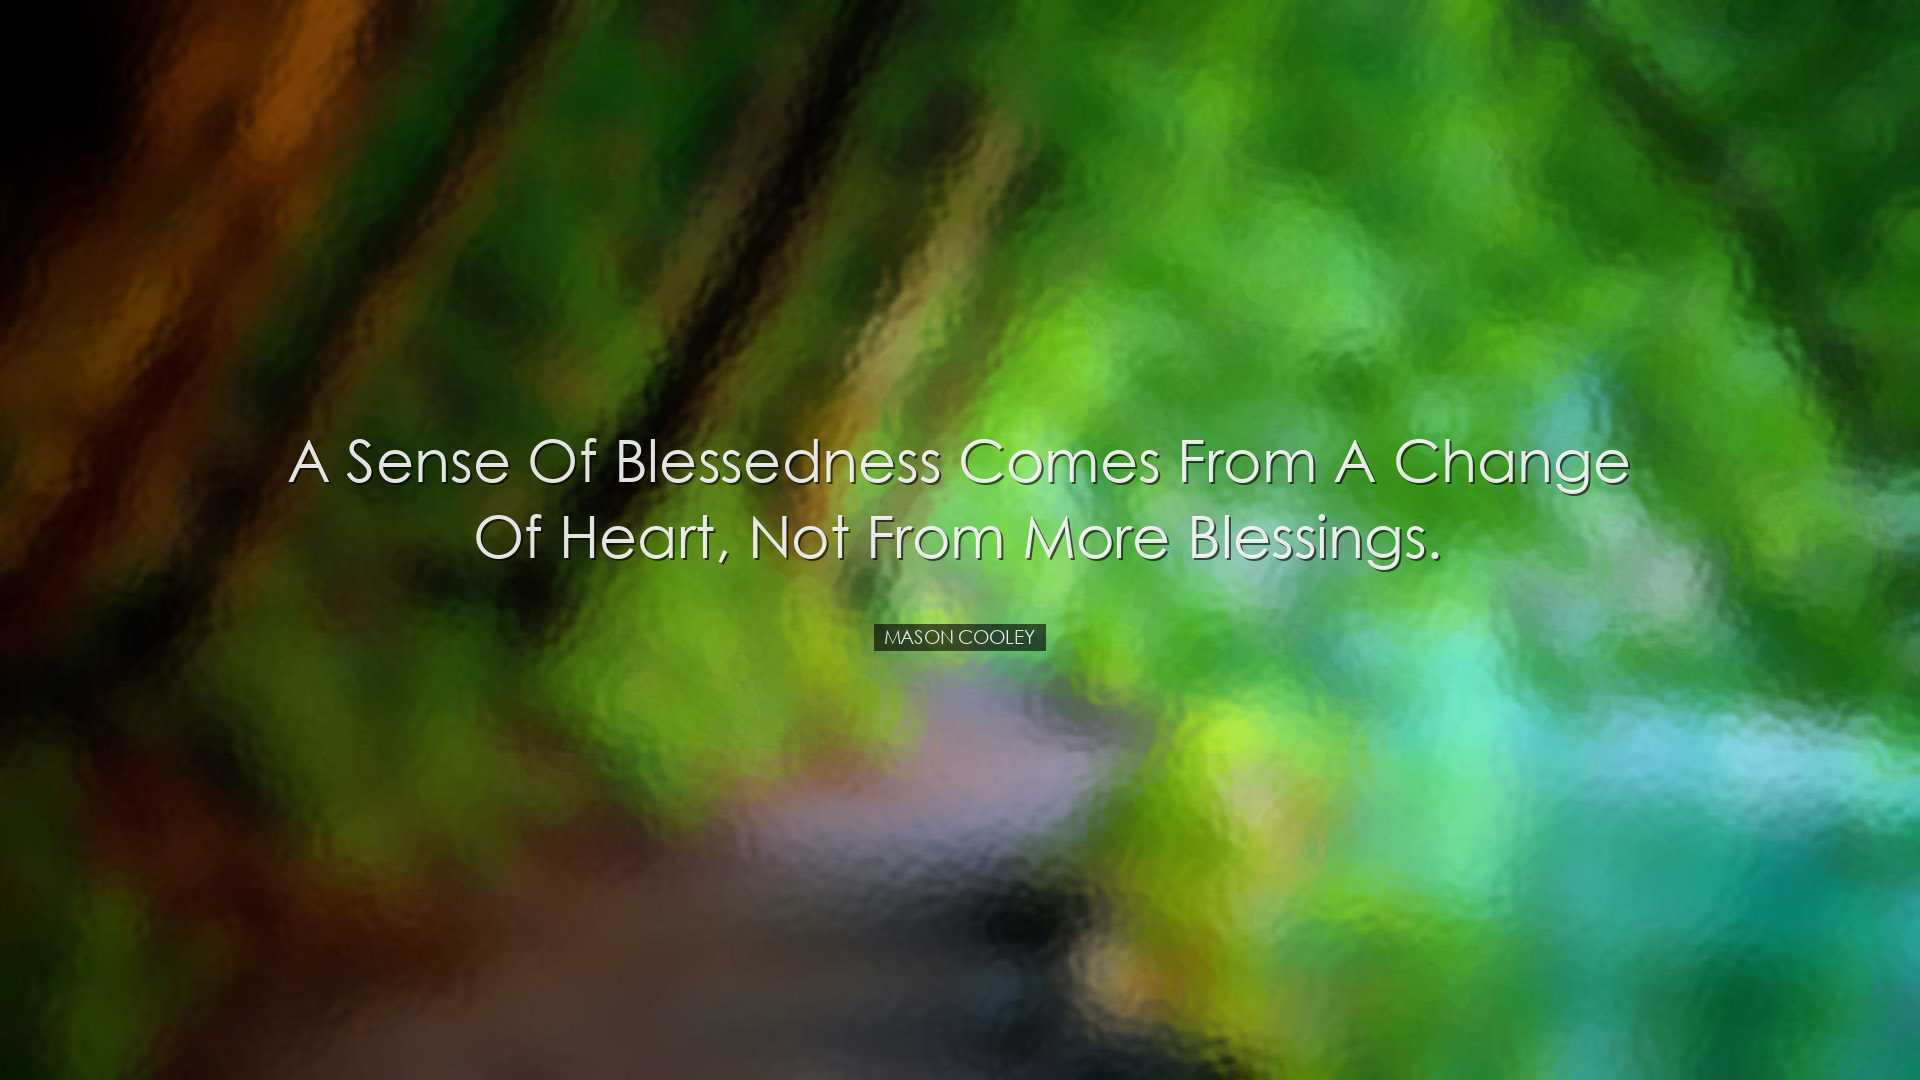 A sense of blessedness comes from a change of heart, not from more